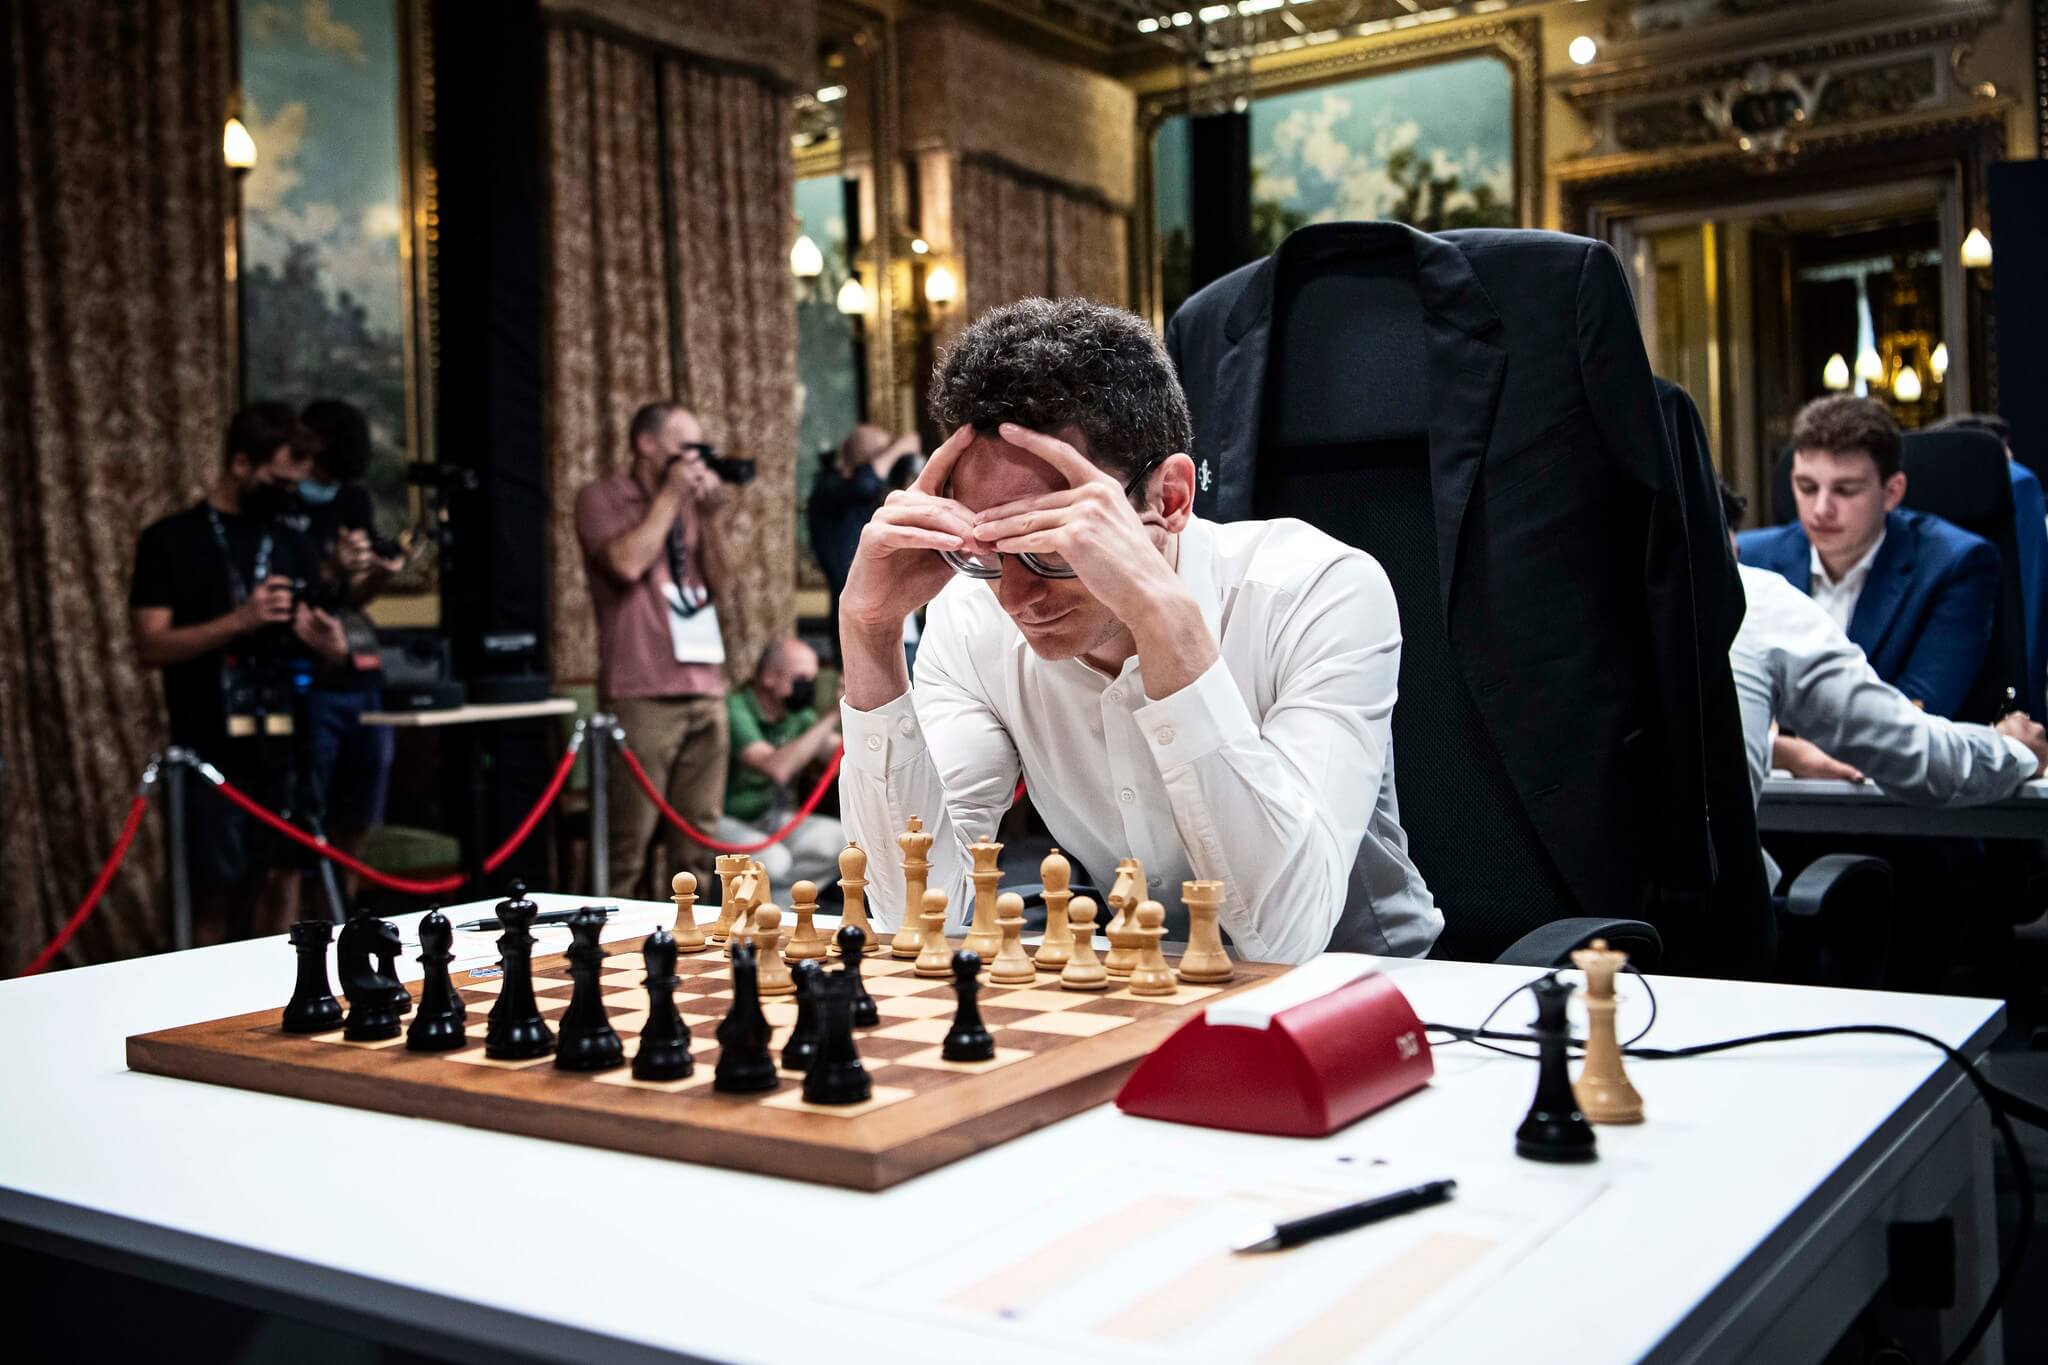 2022 Candidates, Round 7: Nepomniachtchi and Caruana in a league